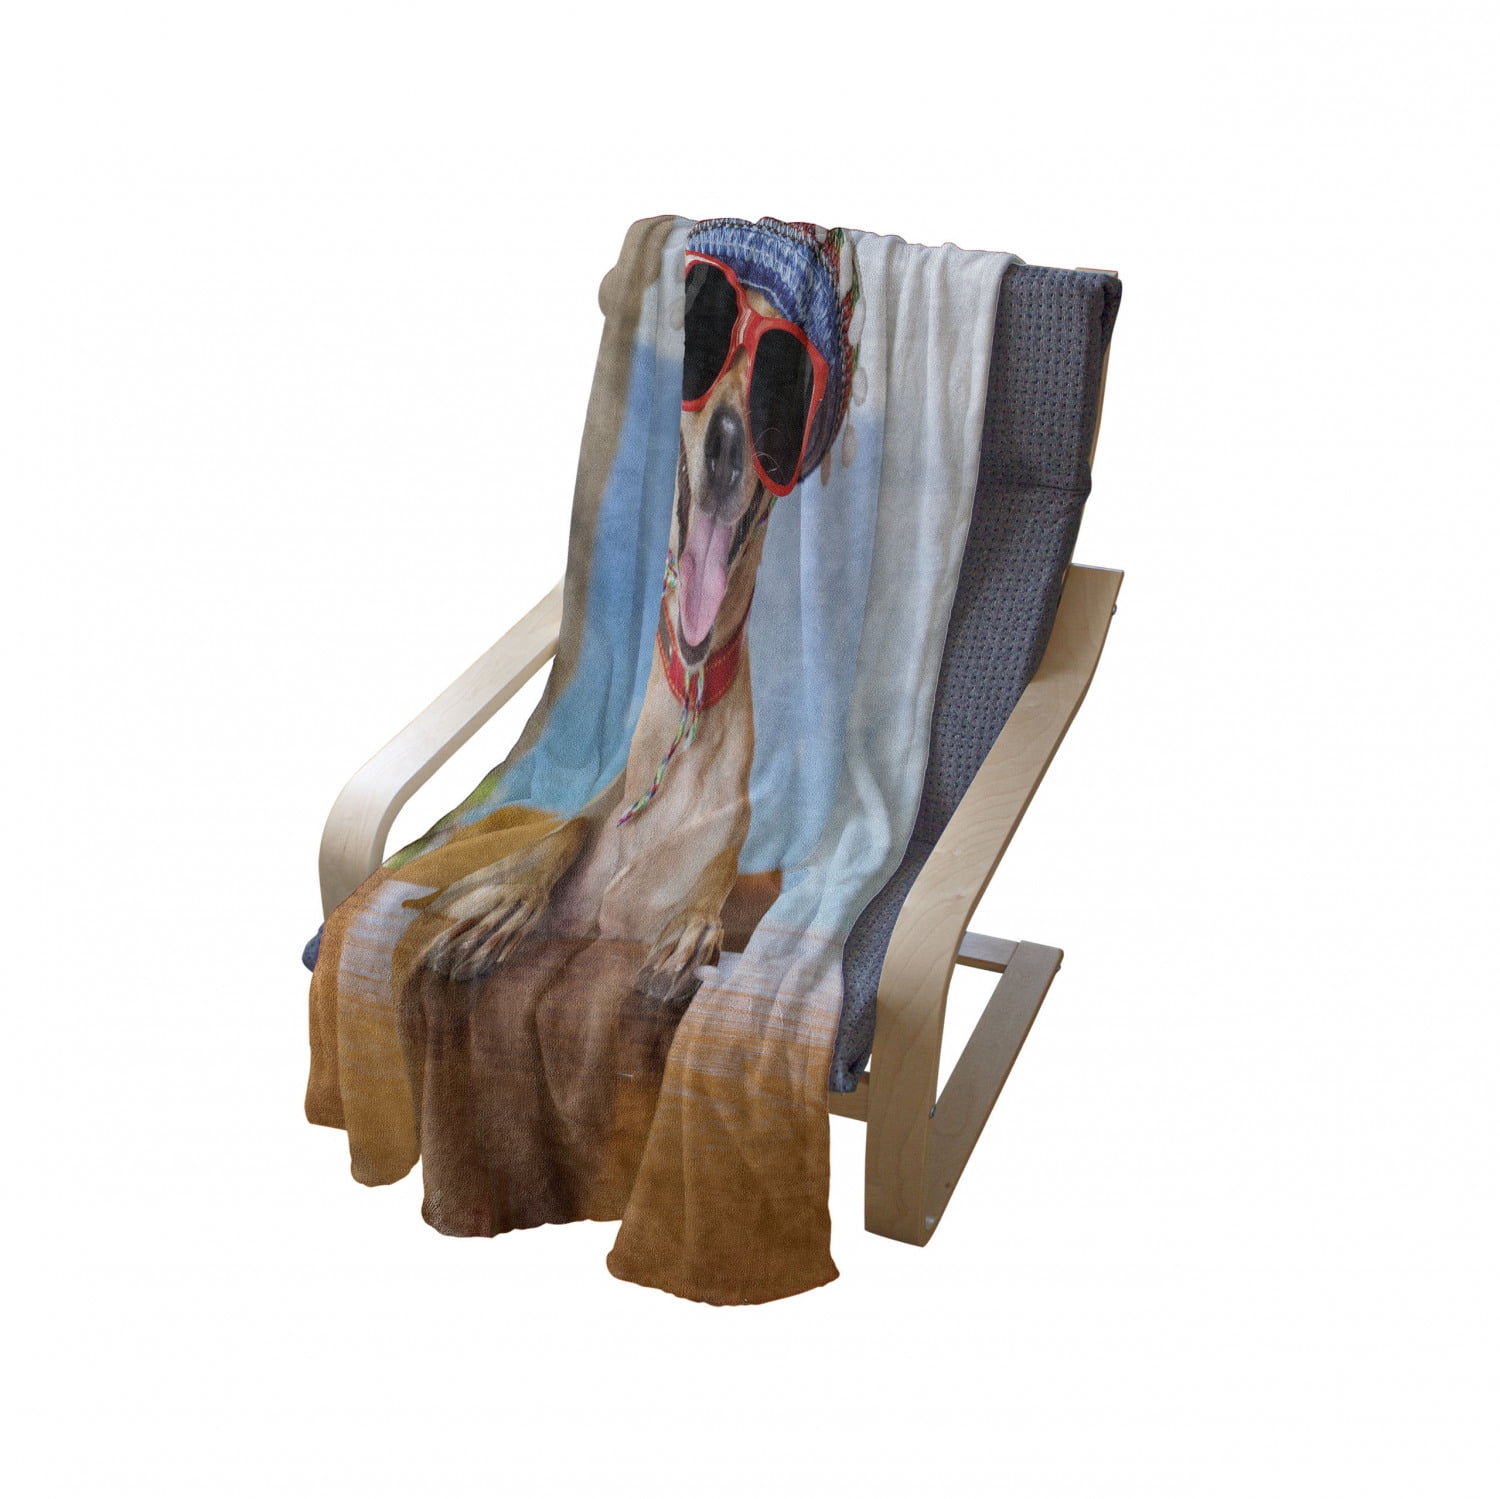 Summertime Tropical Club Related Chihuahua Dog Drinking Cocktails at Ocean View Bar Cozy Plush for Indoor and Outdoor Use Ambesonne Funny Soft Flannel Fleece Throw Blanket 60 x 80 Multicolor